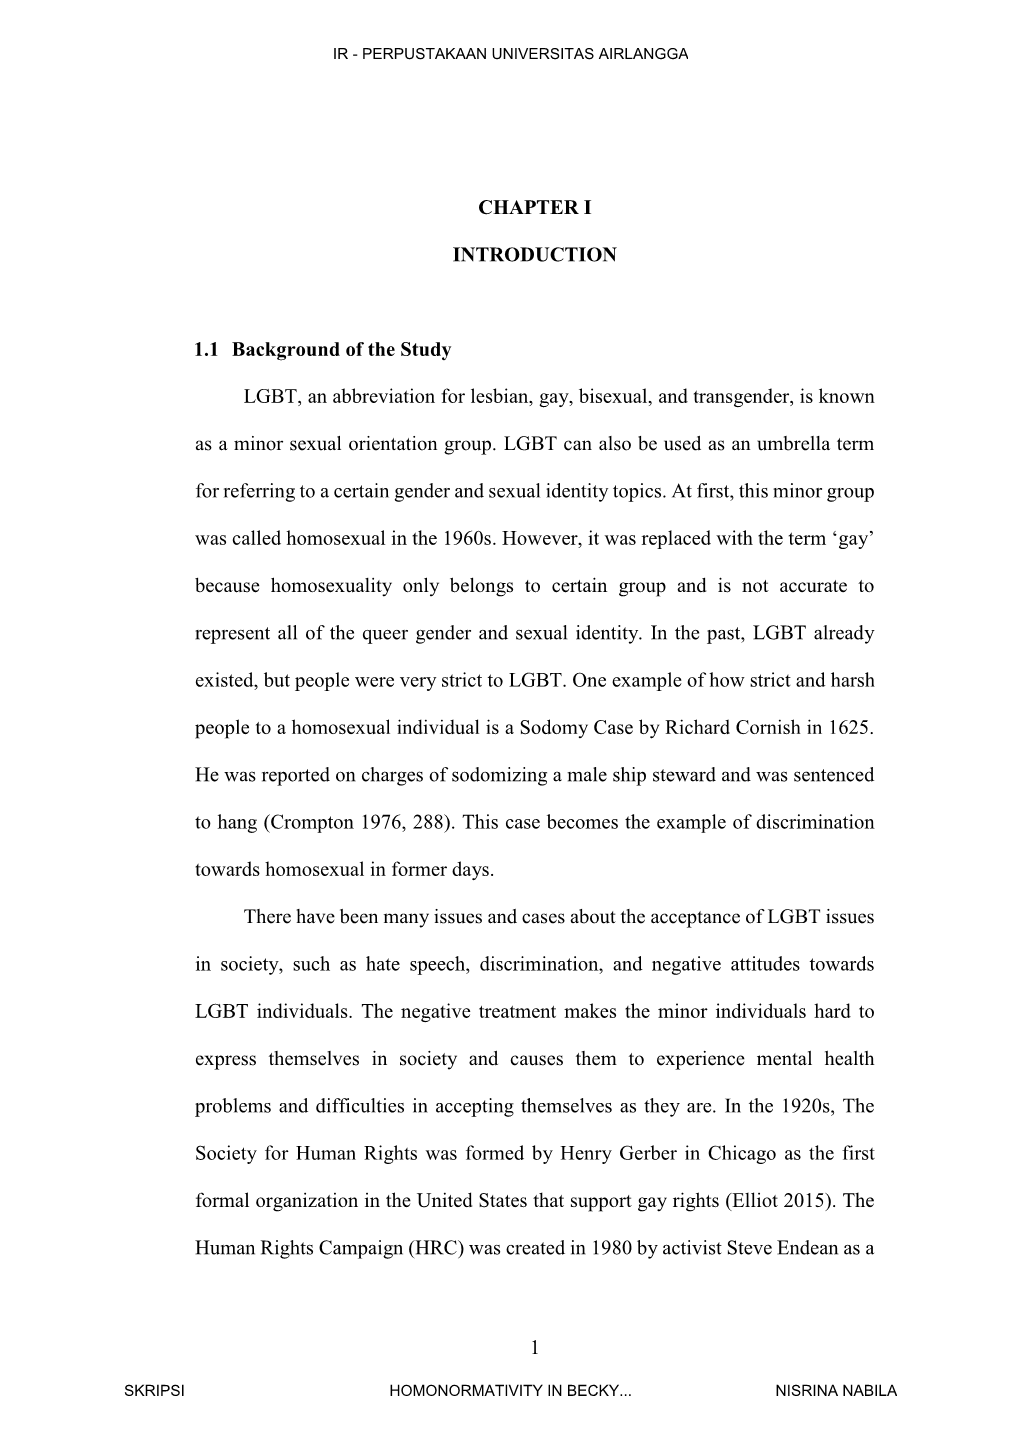 1 CHAPTER I INTRODUCTION 1.1 Background of the Study LGBT, An